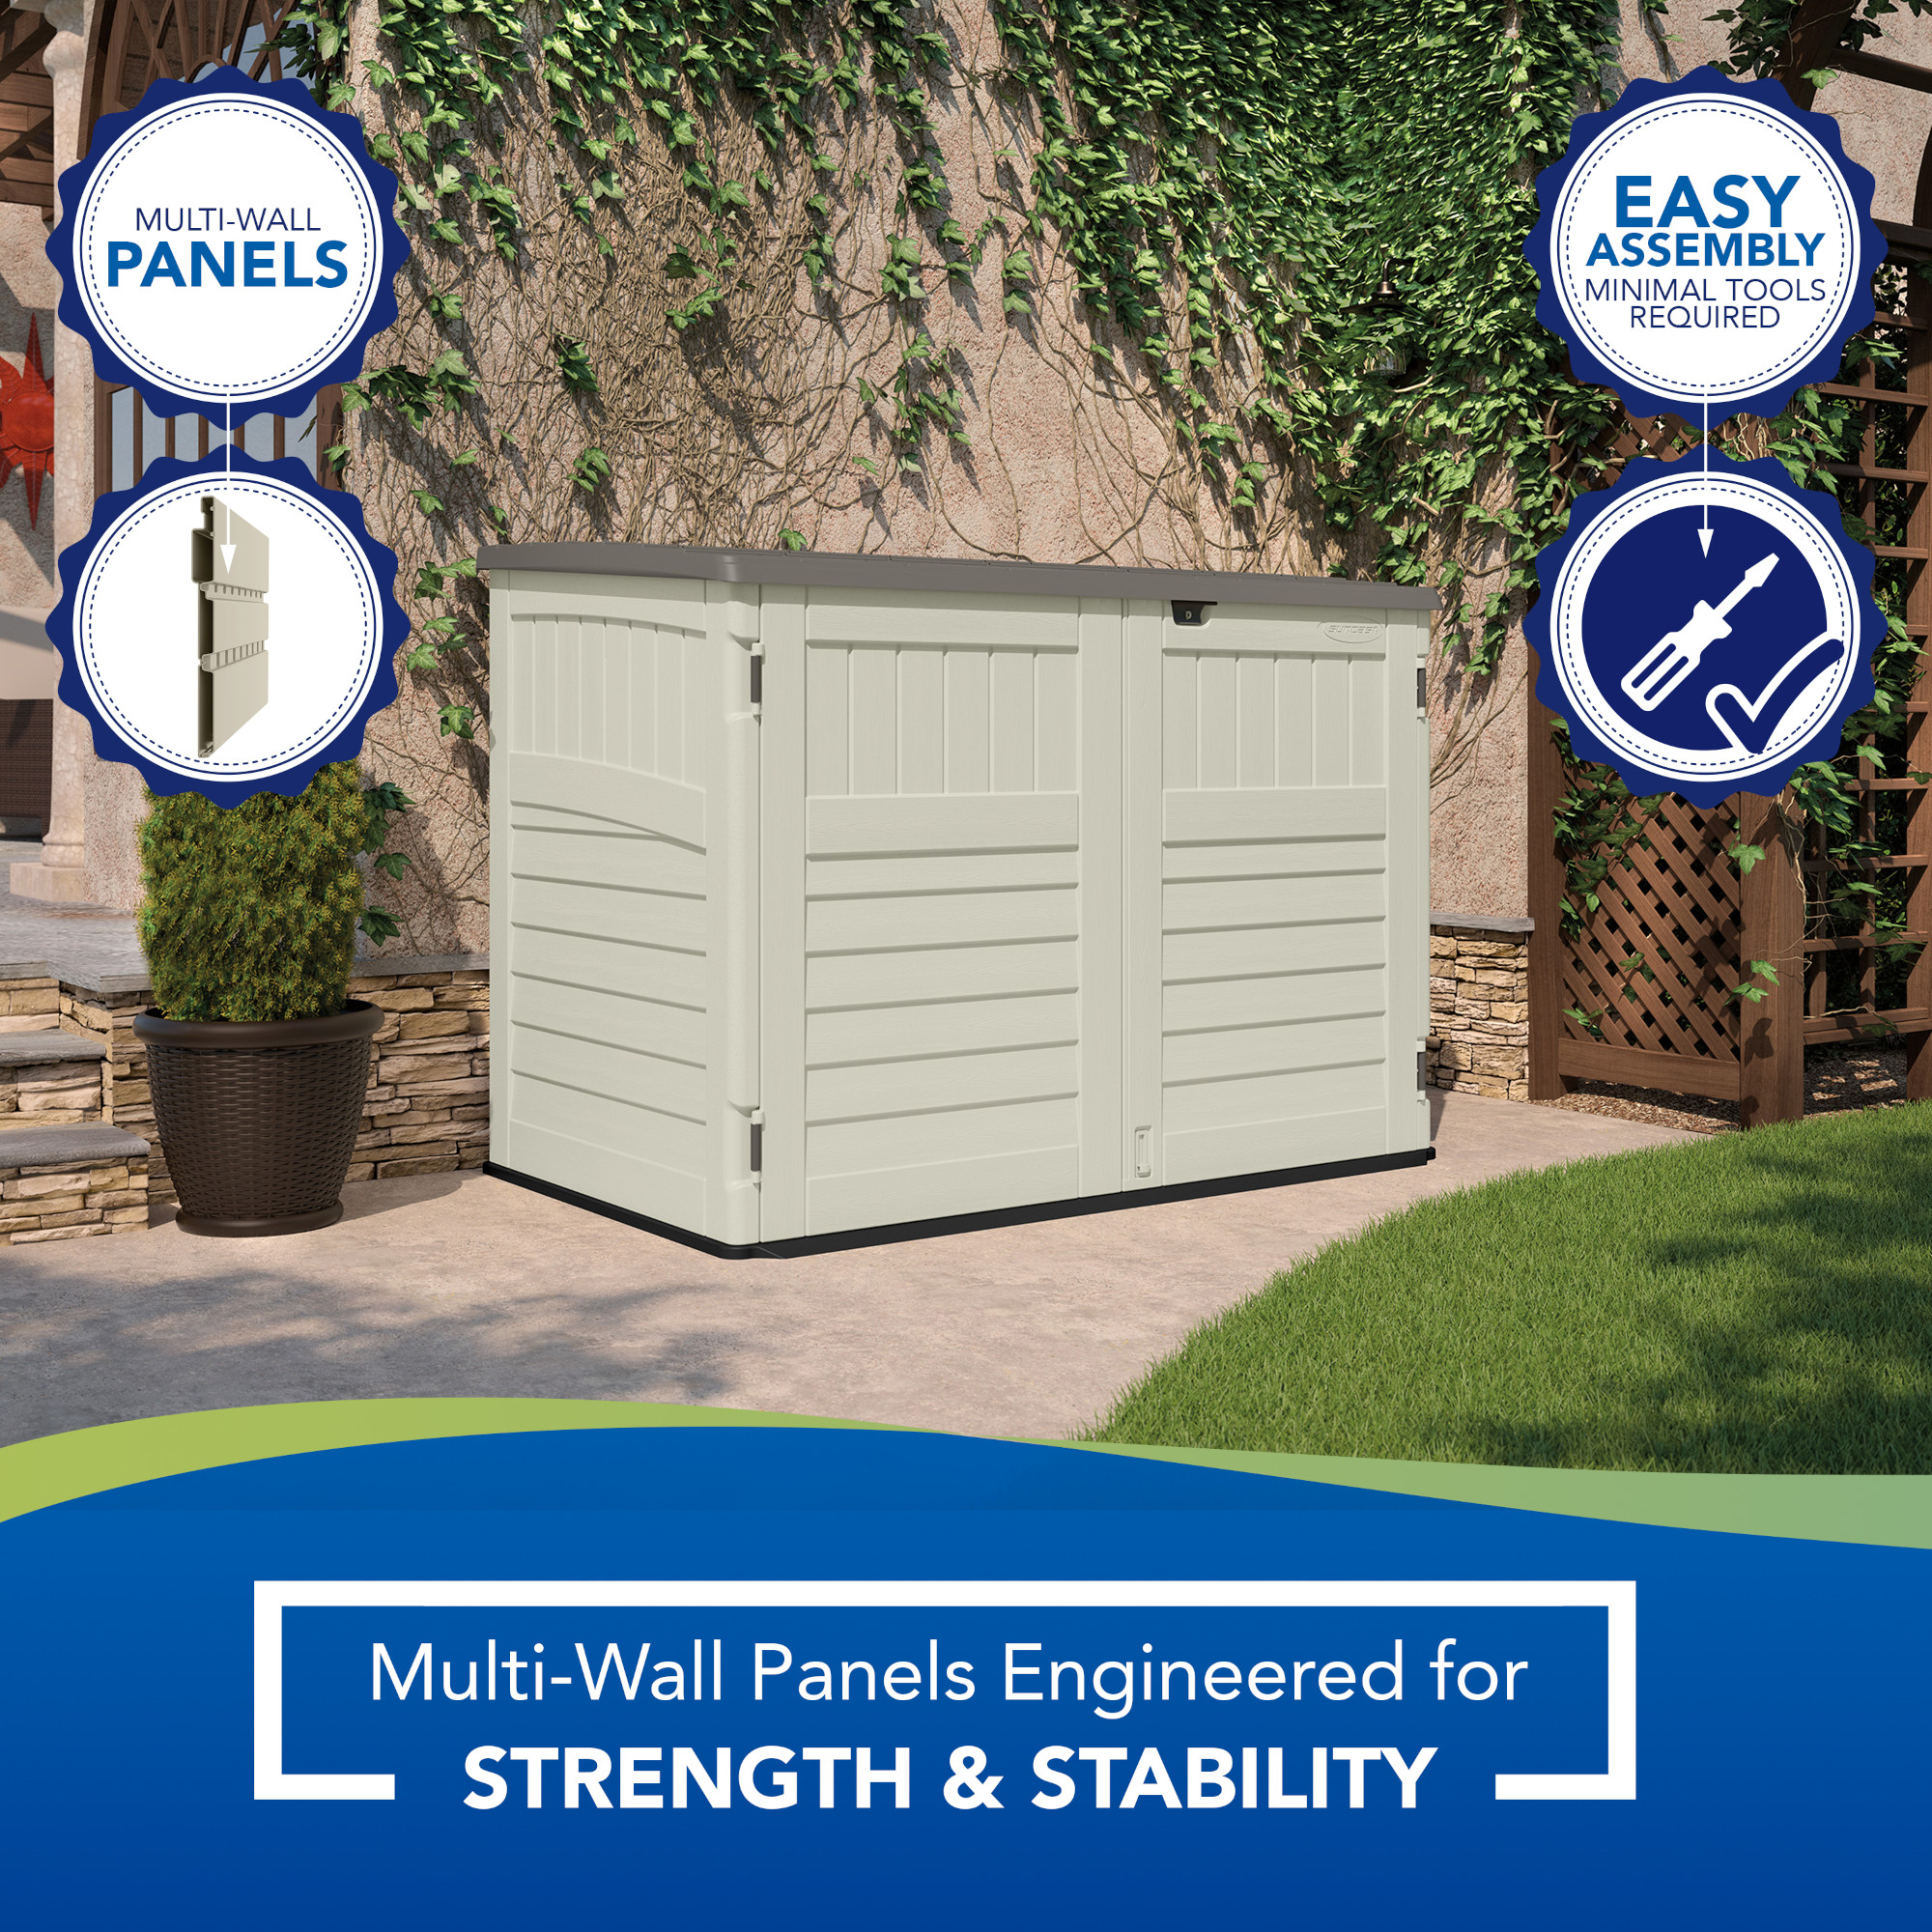 Suncast Plastic Storage Shed, Off-White and Gray, 44.25 in D x 52 in H x 70.5 in W - image 5 of 7